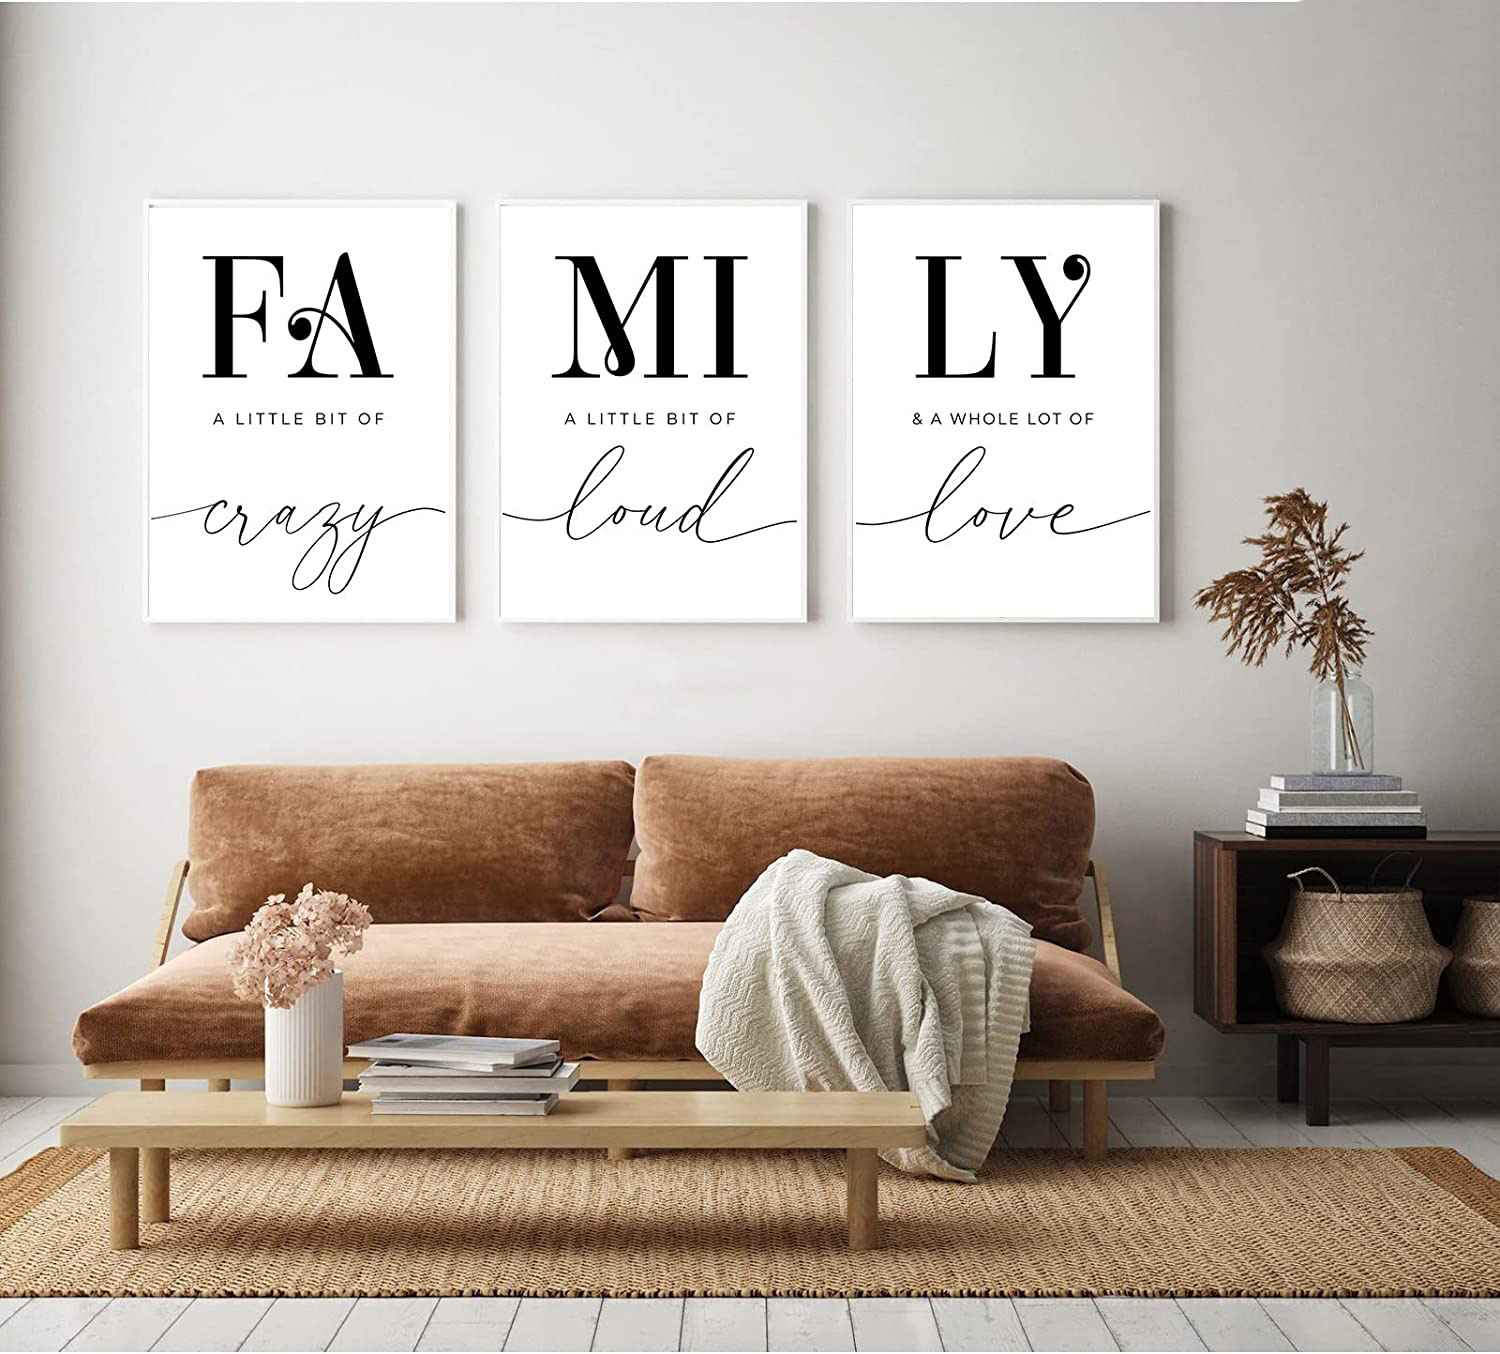 Family Quotes Piece Canvas Wall Decor for Living Room Wall Art Sets Decor  a Little bit of Crazy Quote Wall Art Posters Bedroom Artwork With Inner  Frame